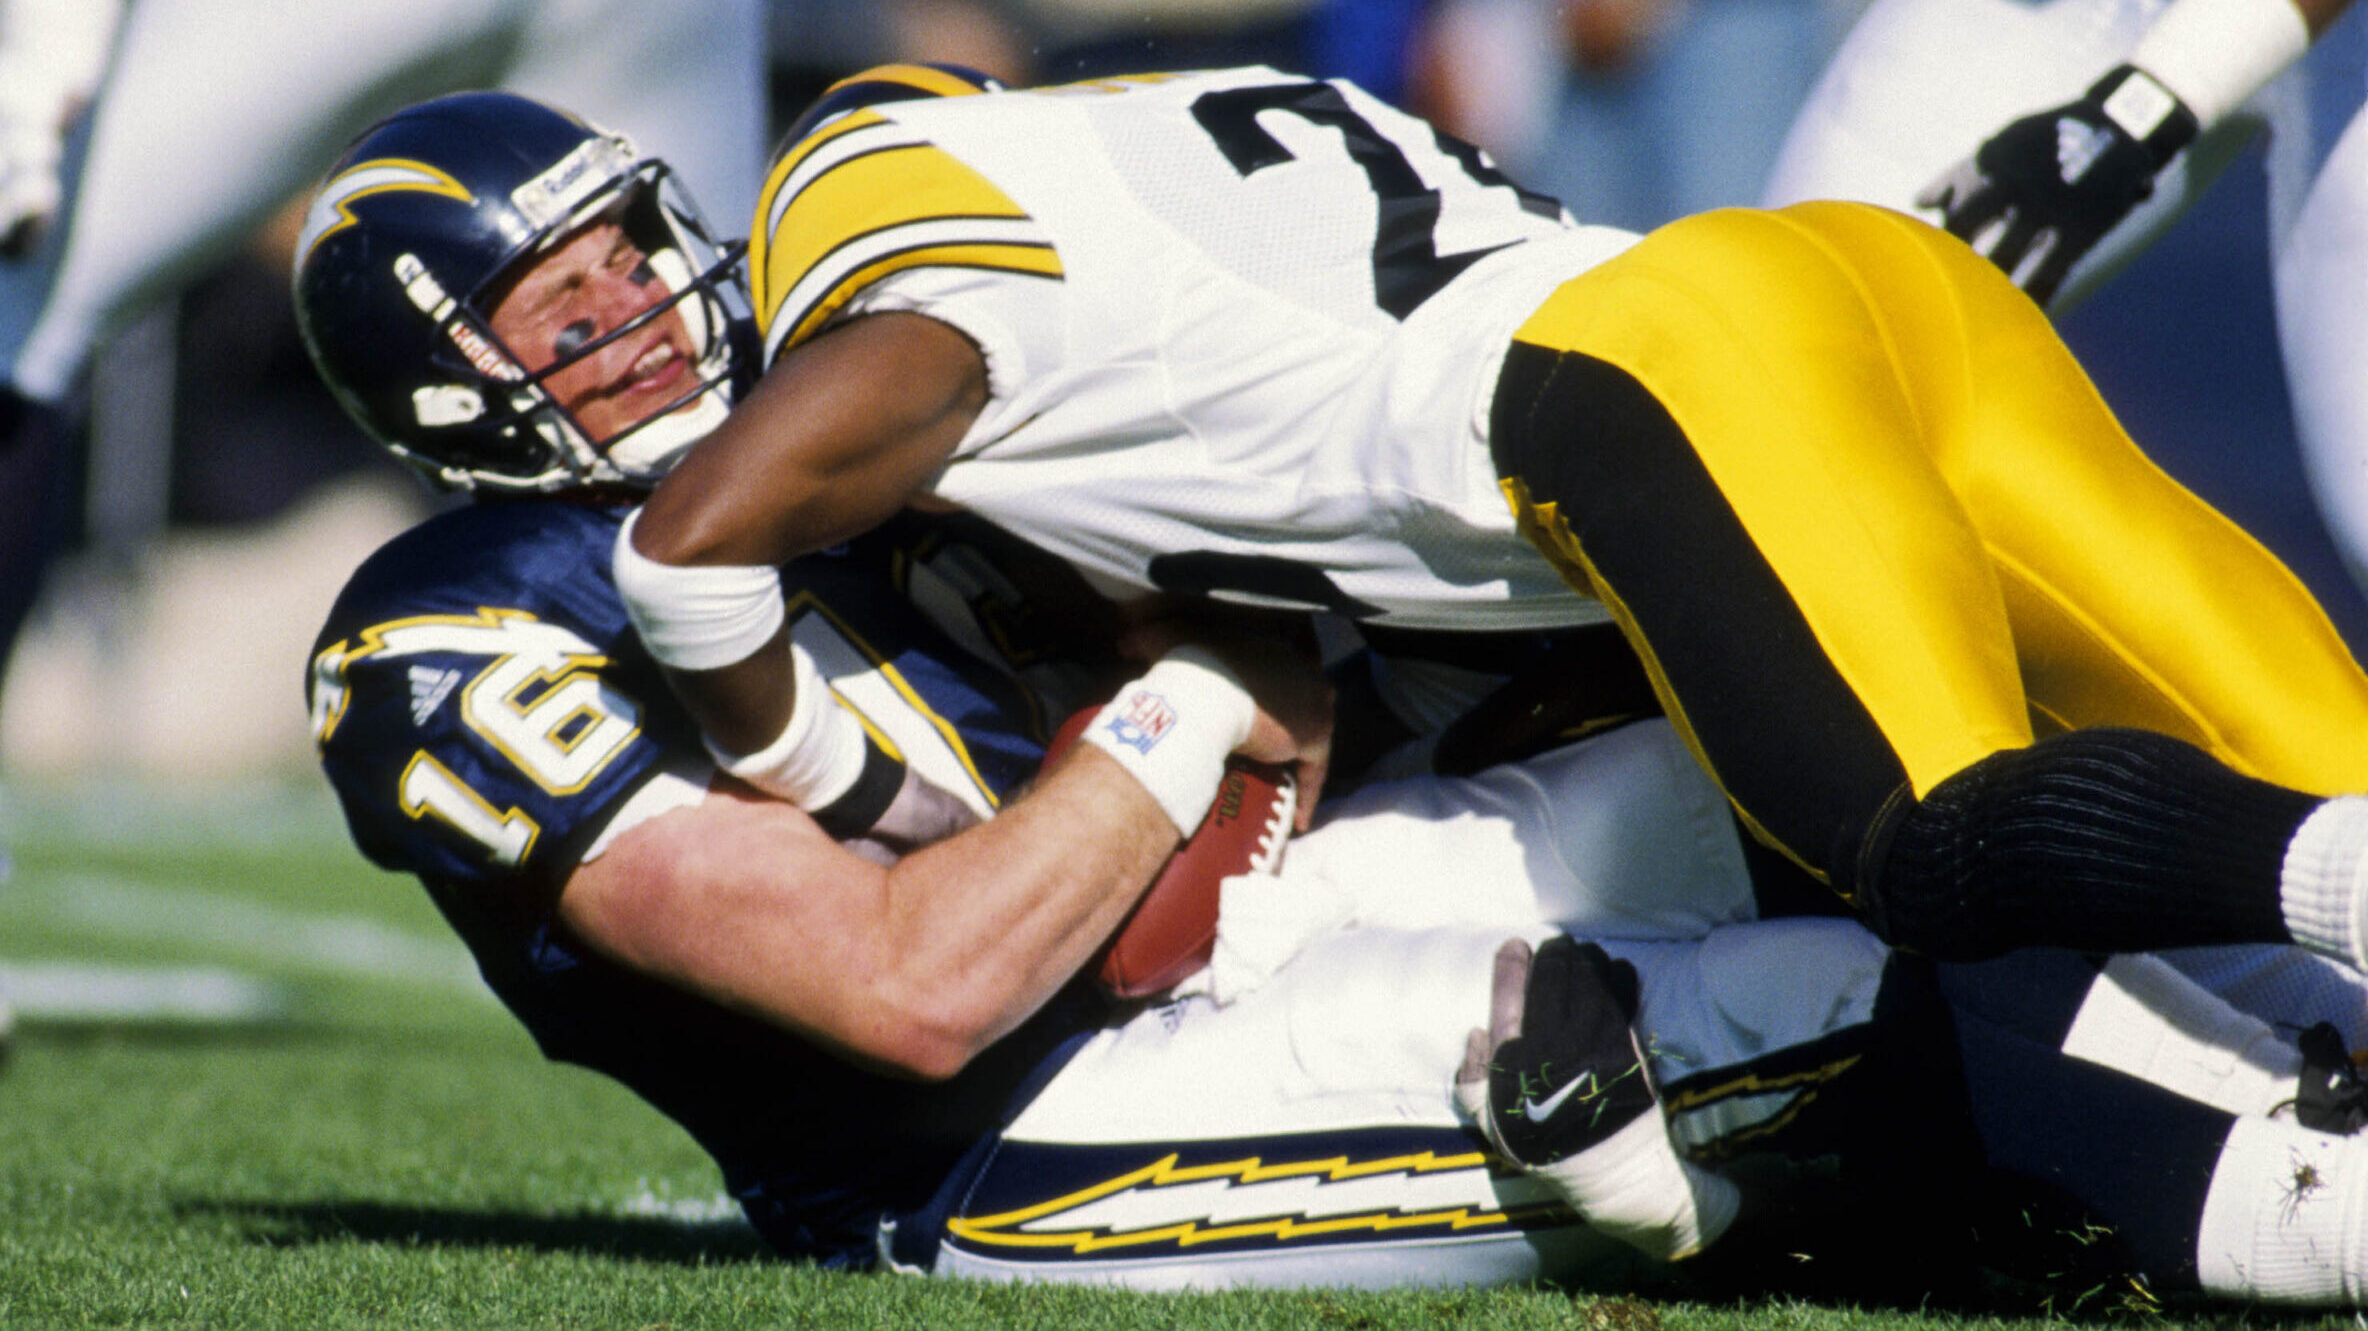 Ryan Leaf, Chargers